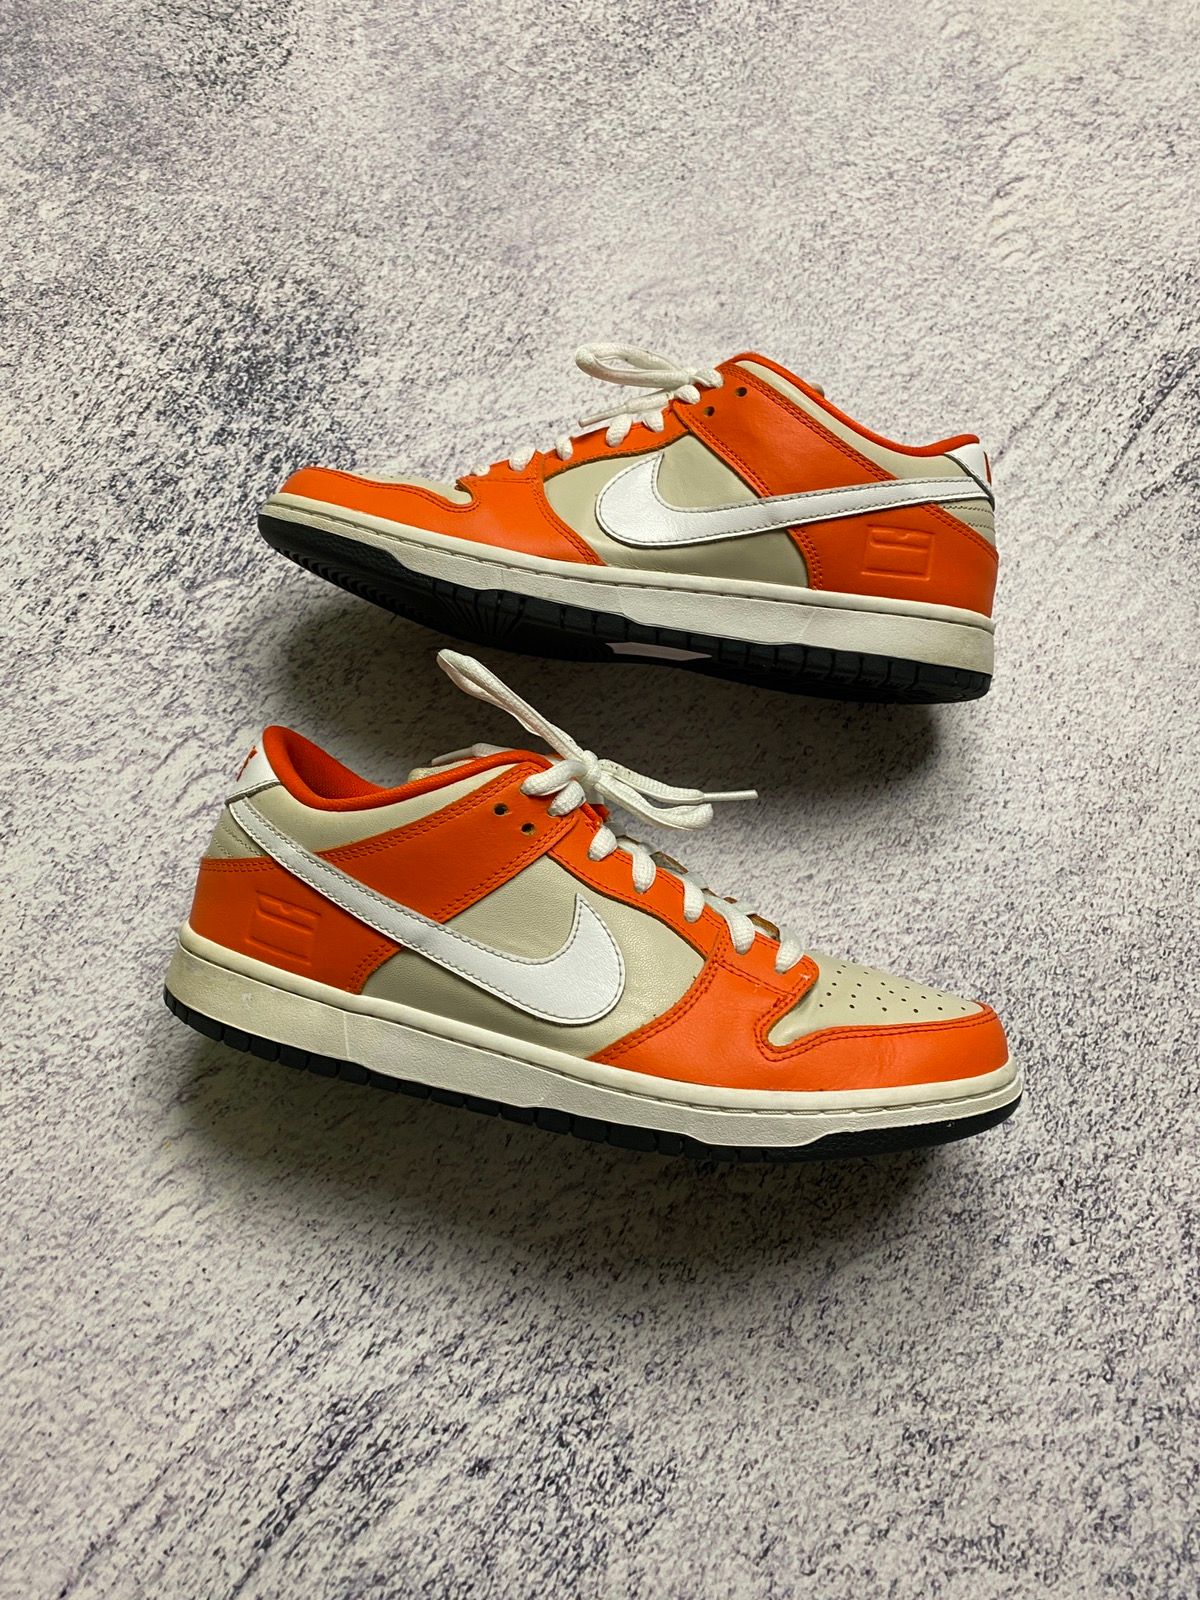 Pre-owned Nike Sb Dunk Low Orange Box Us 11 Shoes